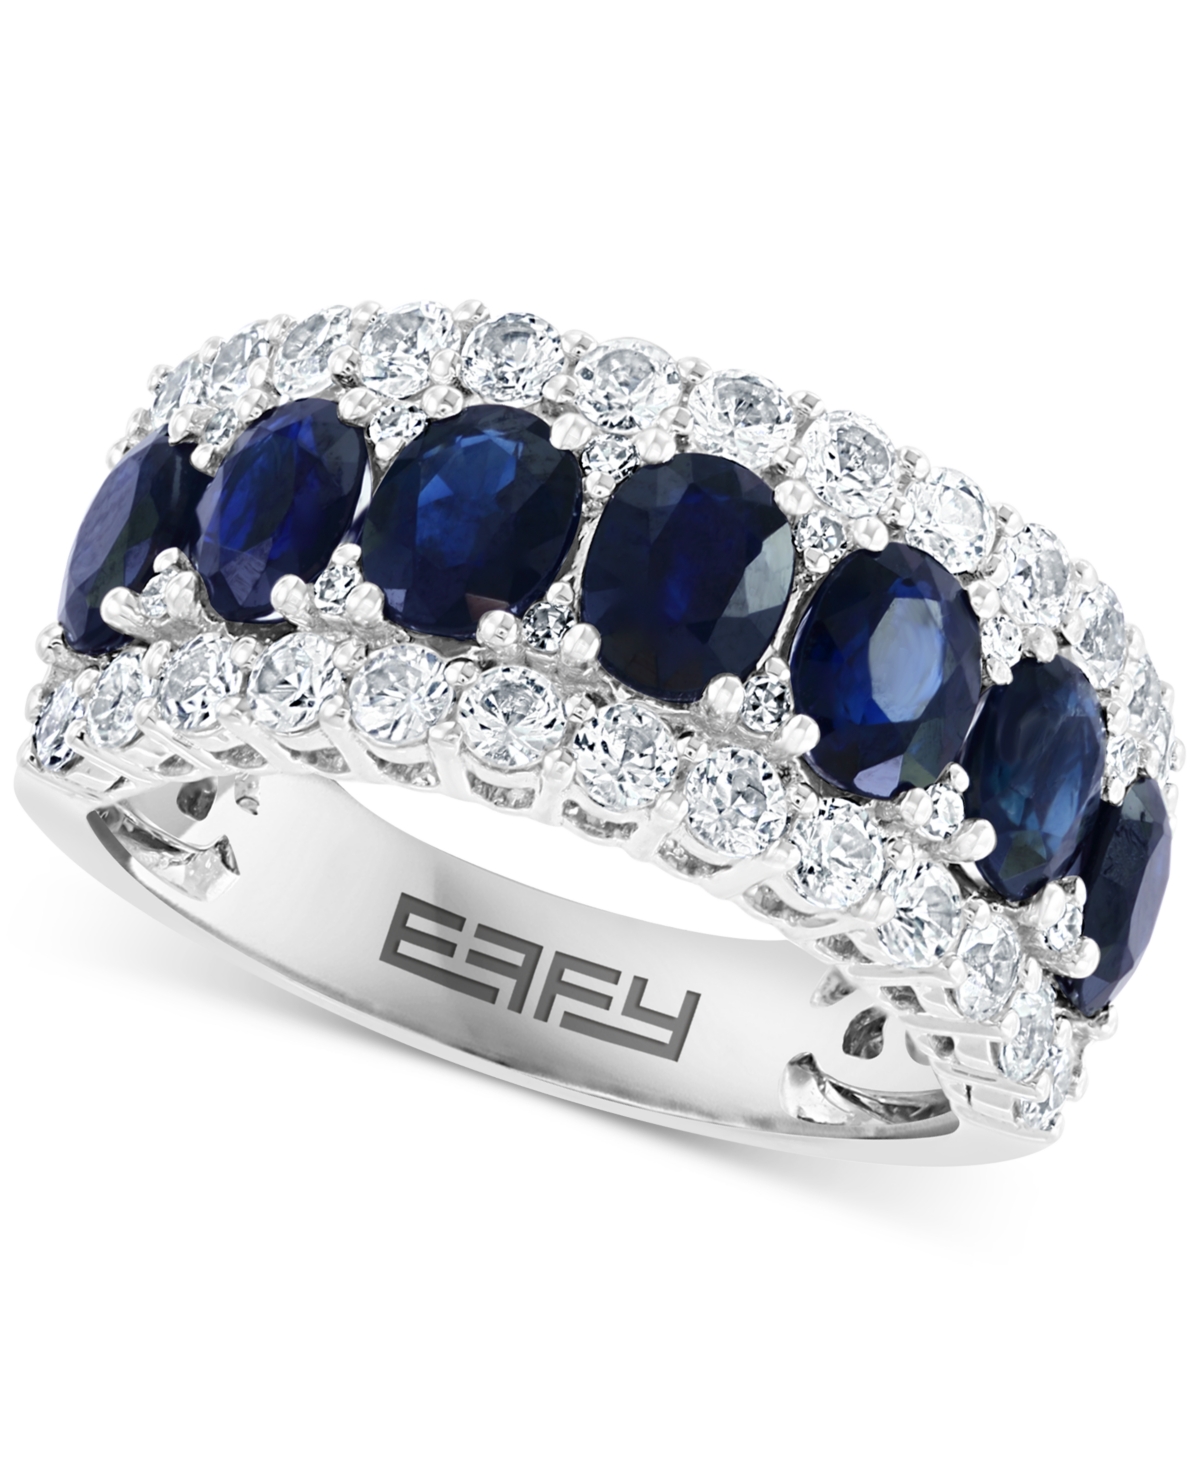 Effy Blue & White Sapphire Ring (3-1/2 ct. t.w.) & Diamond (1/20 ct. t.w.) in 14k White Gold. (Also available Emerald and Multi-Sapphire ) - Yellow Go